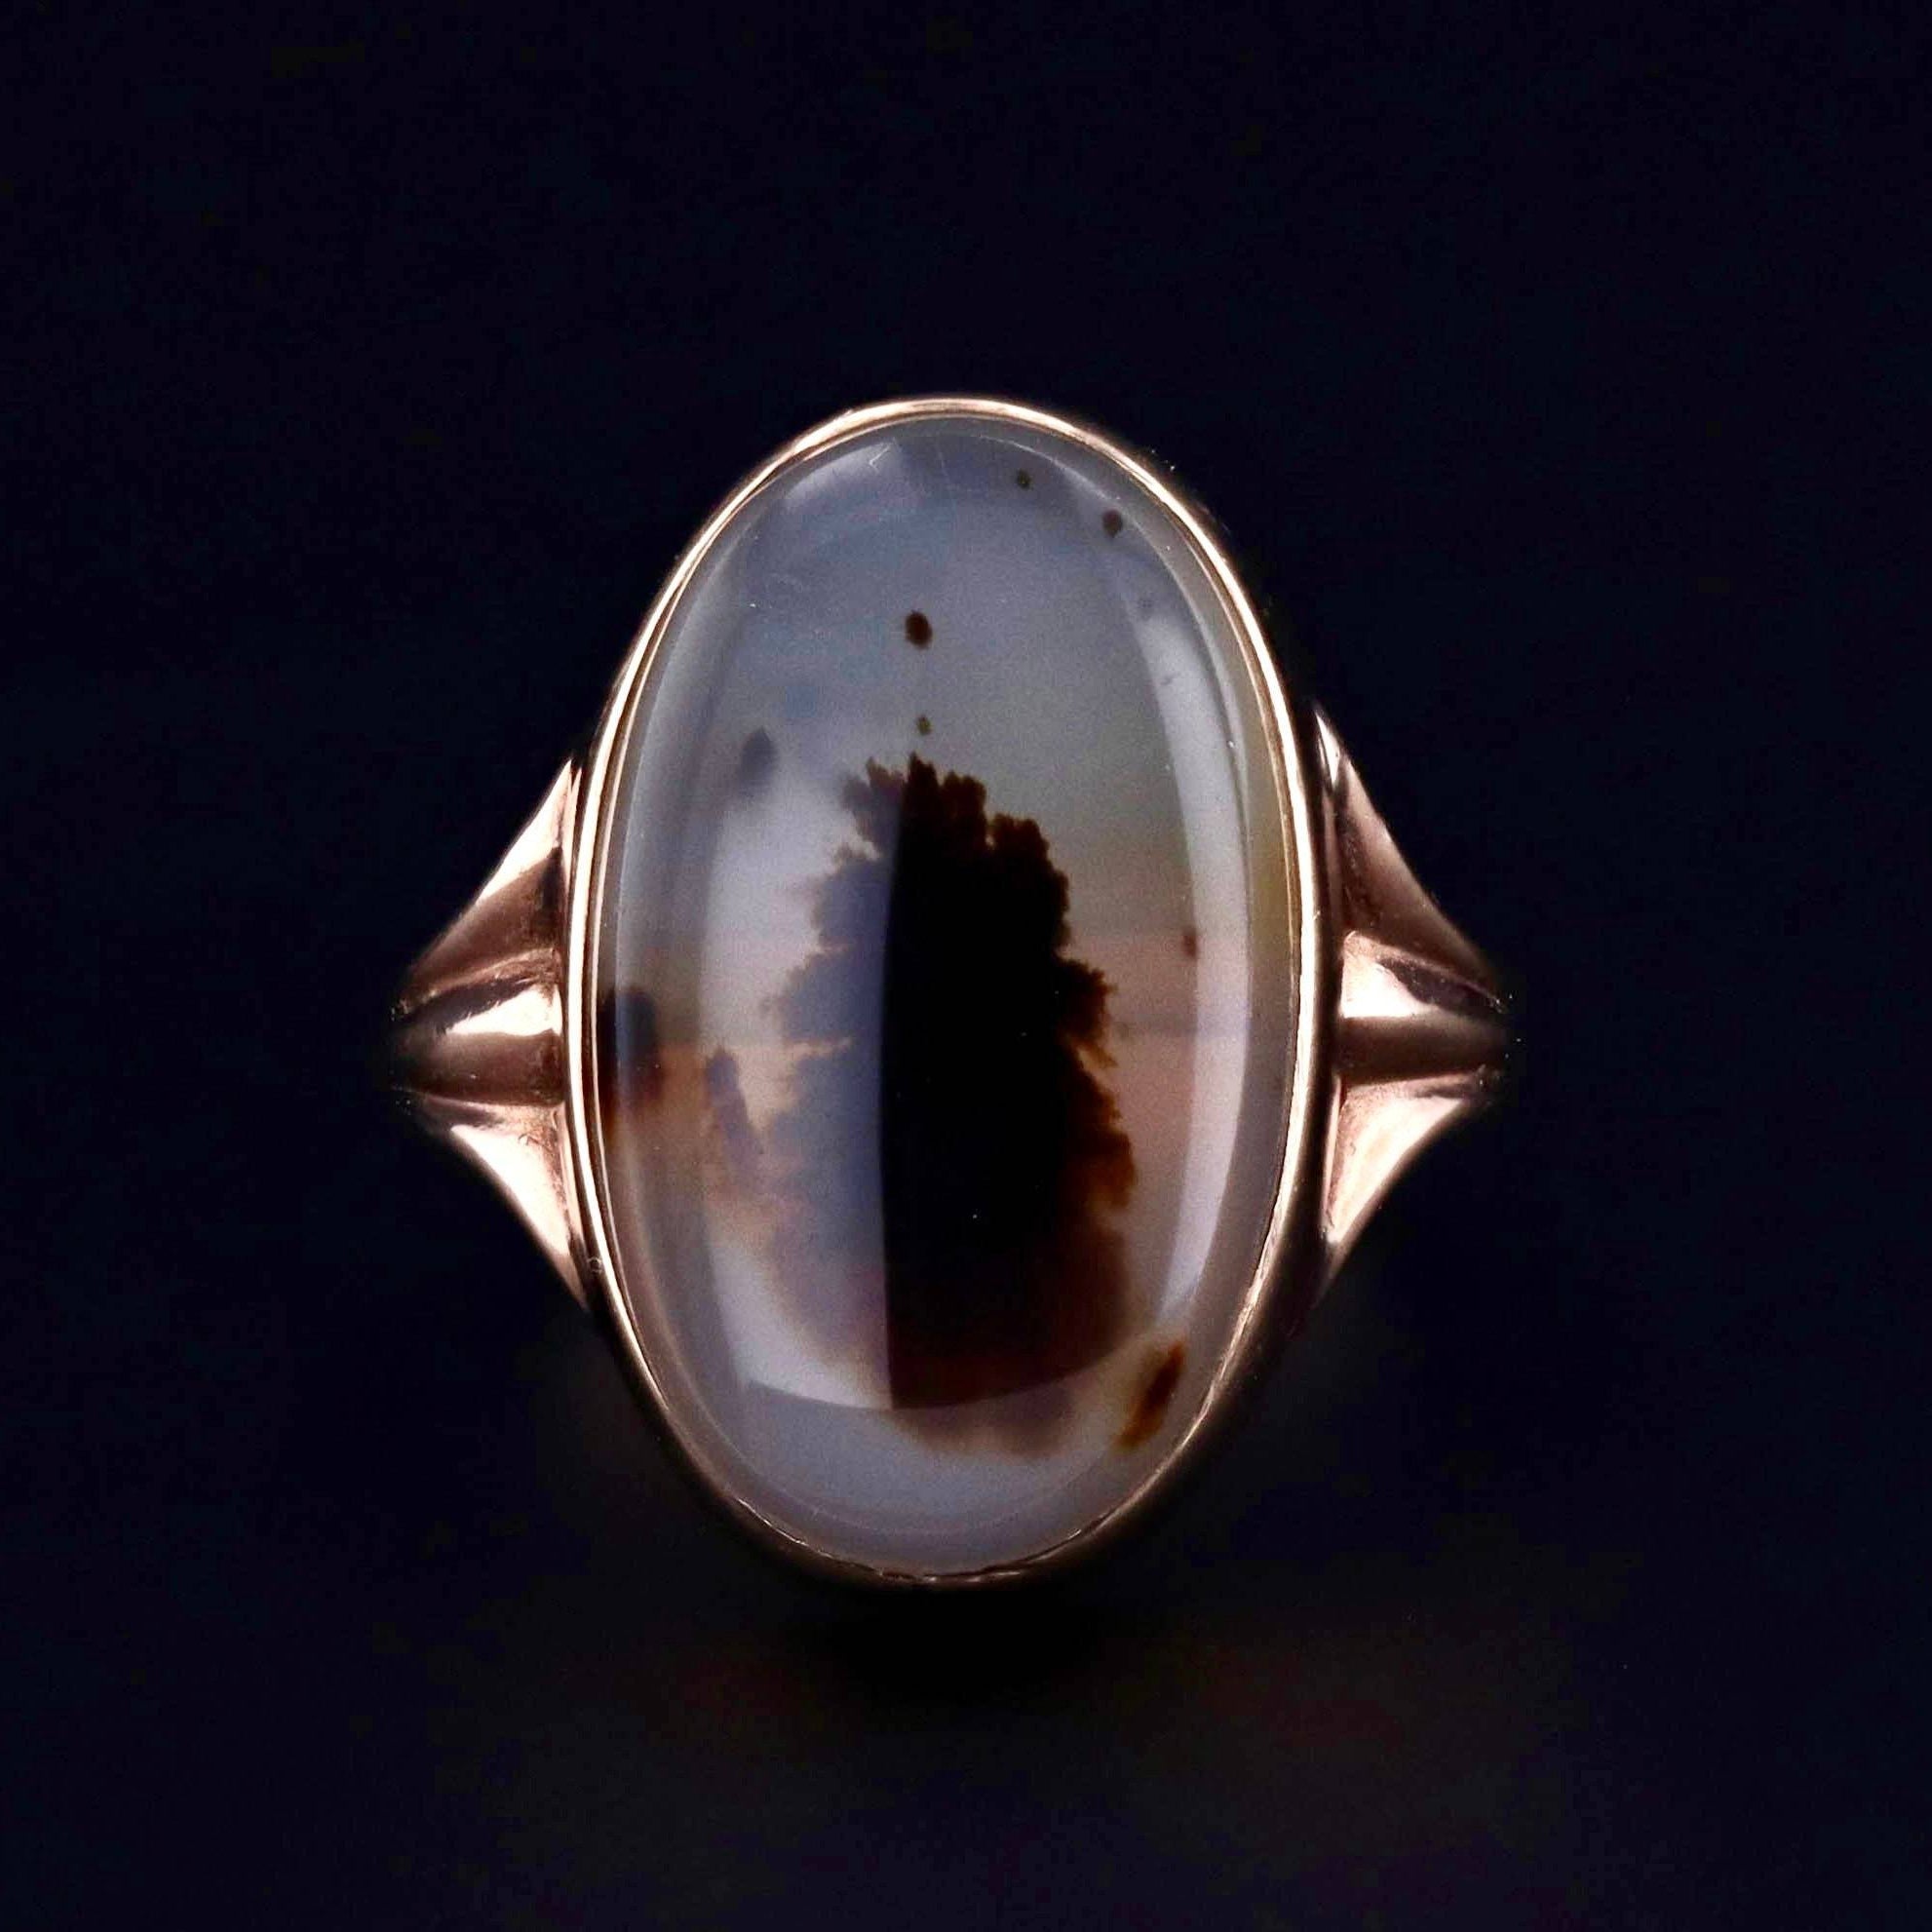 Agate Ring | 10k Gold Agate Ring 